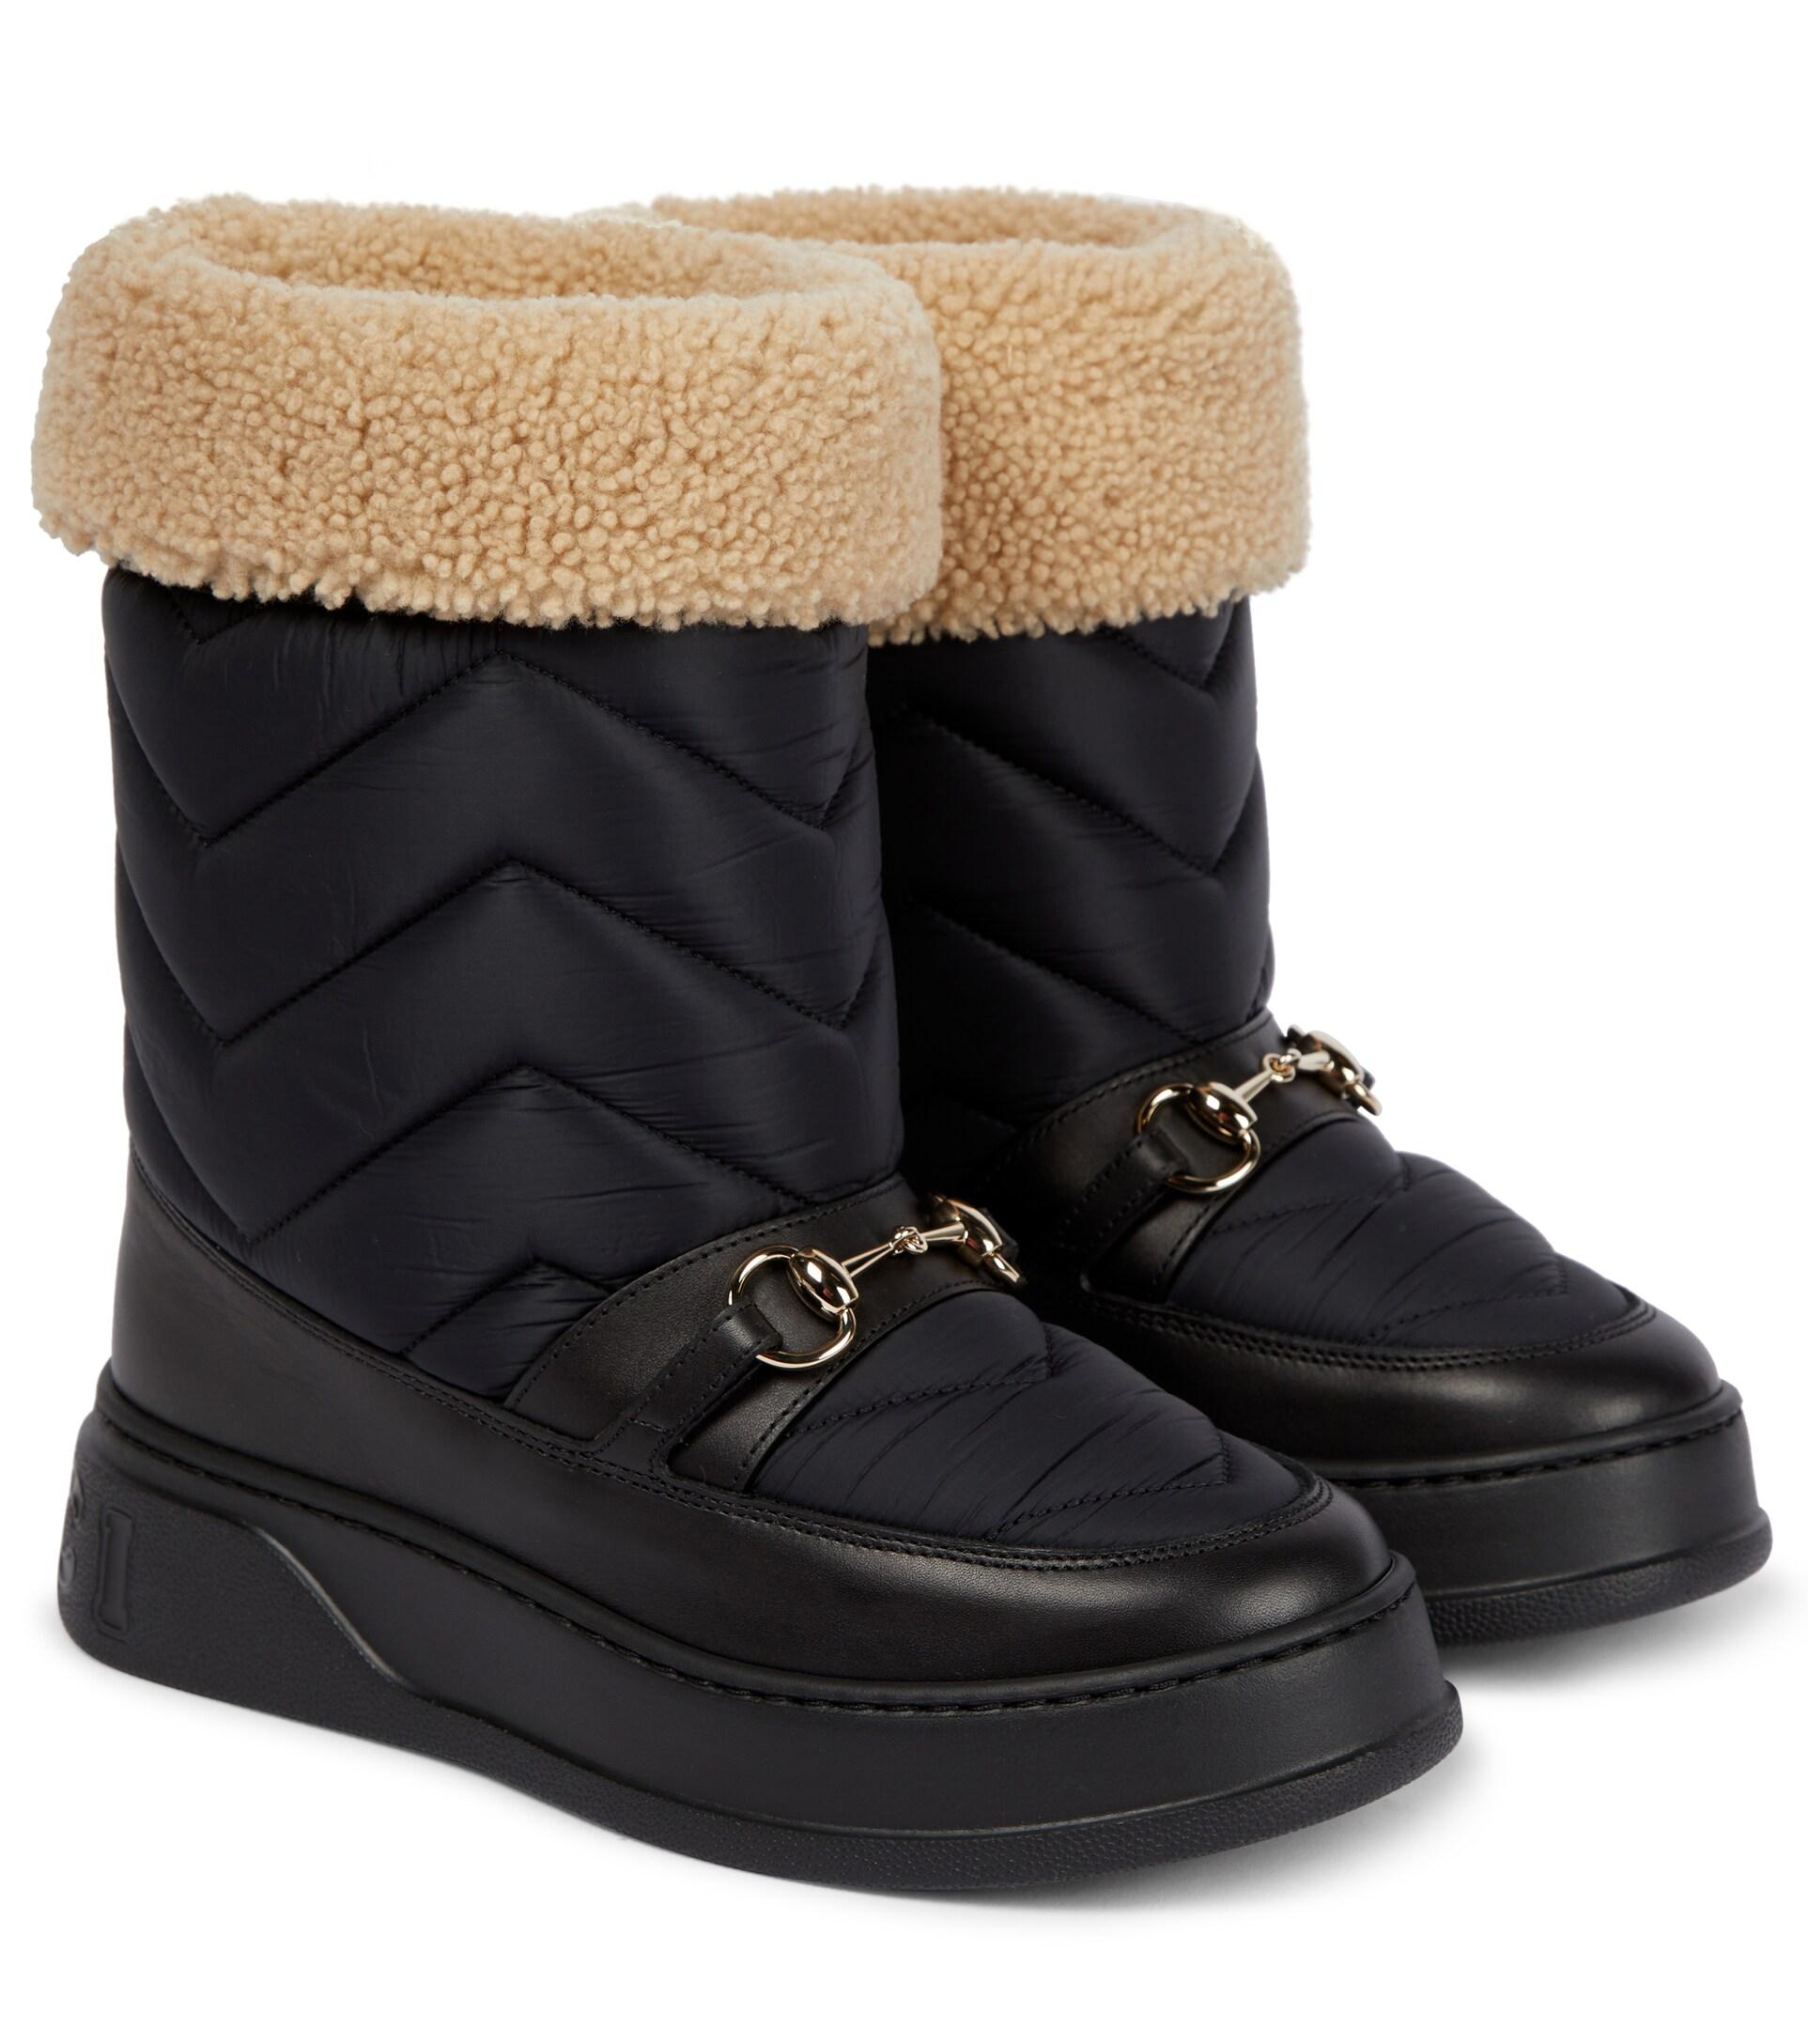 Gucci Shearling-lined Snow Boots in Black | Lyst